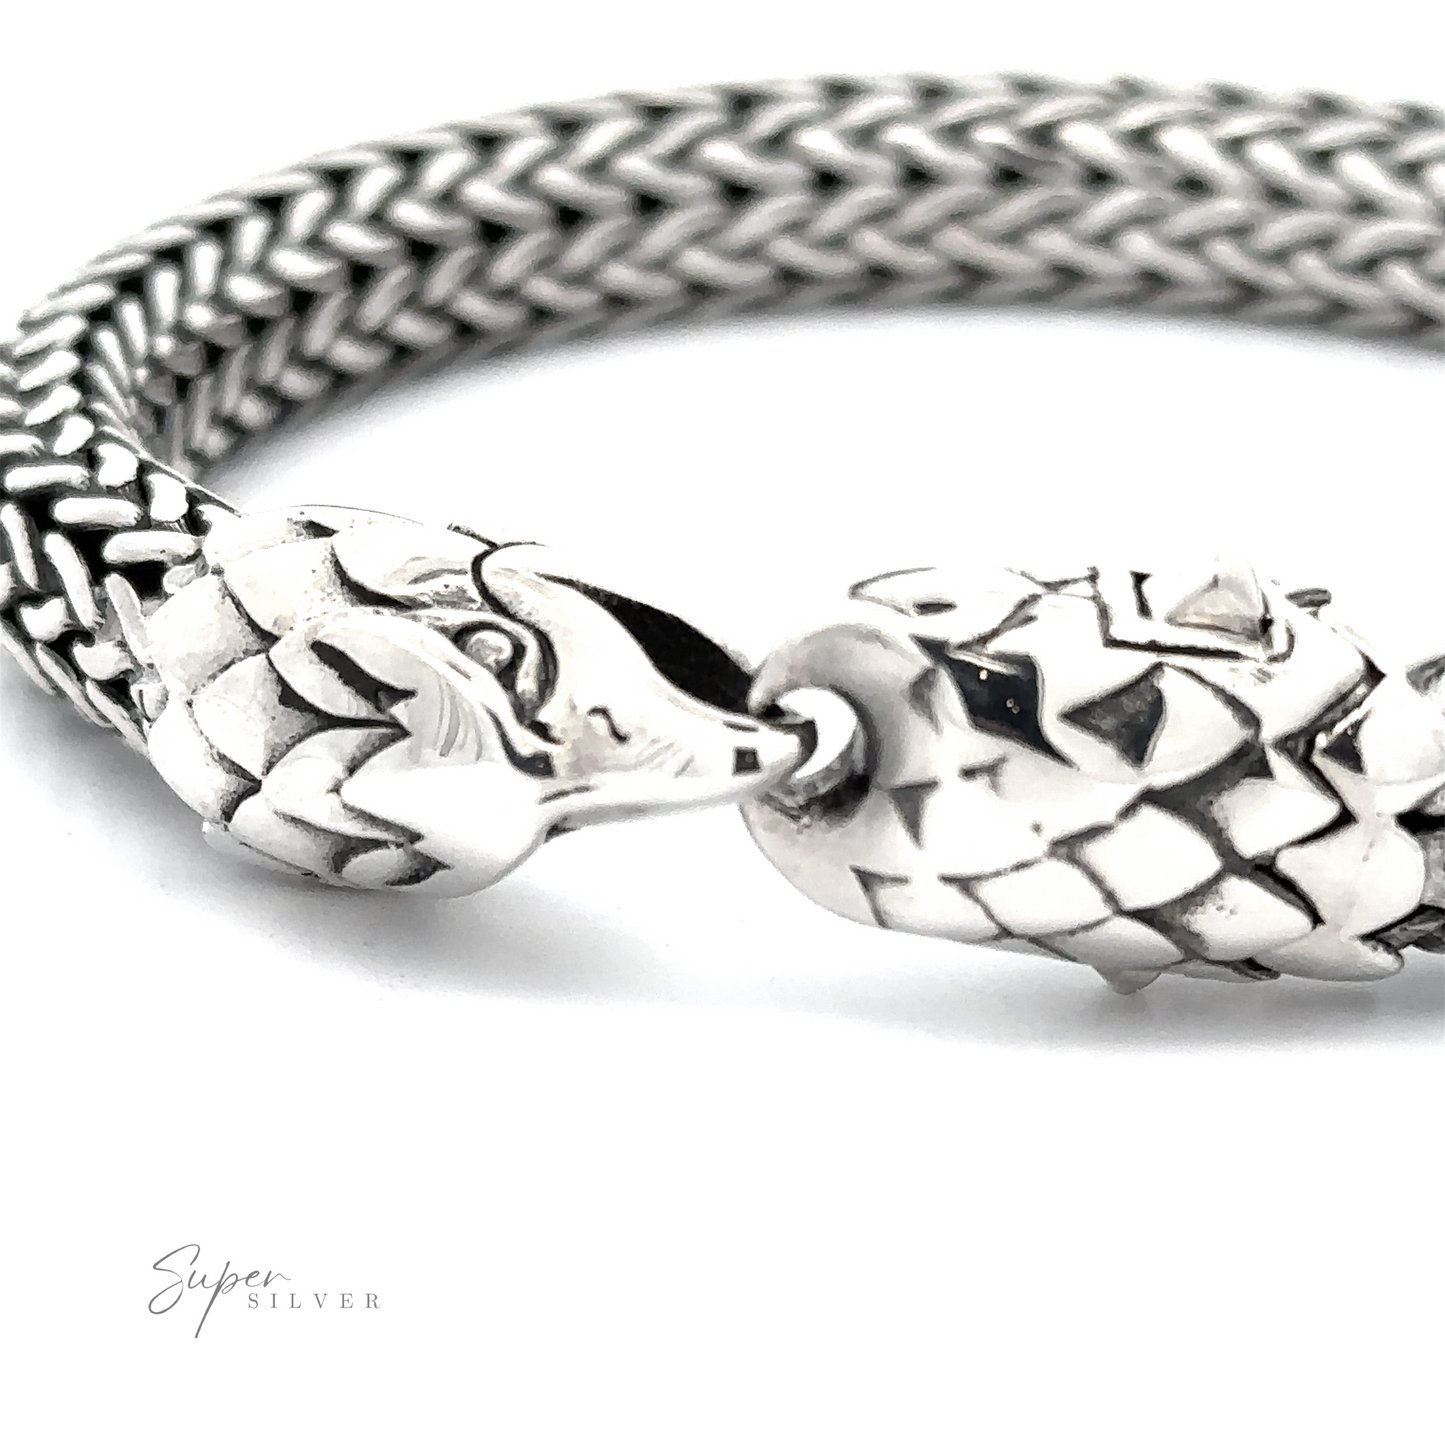 Close-up of a Heavy Braided Bracelet with Eagle Clasp, crafted from .925 Sterling Silver, with intricately detailed eagle head clasps on both ends, connected by a woven chain. The brand name "Super Silver" is visible in small font on the bottom left.